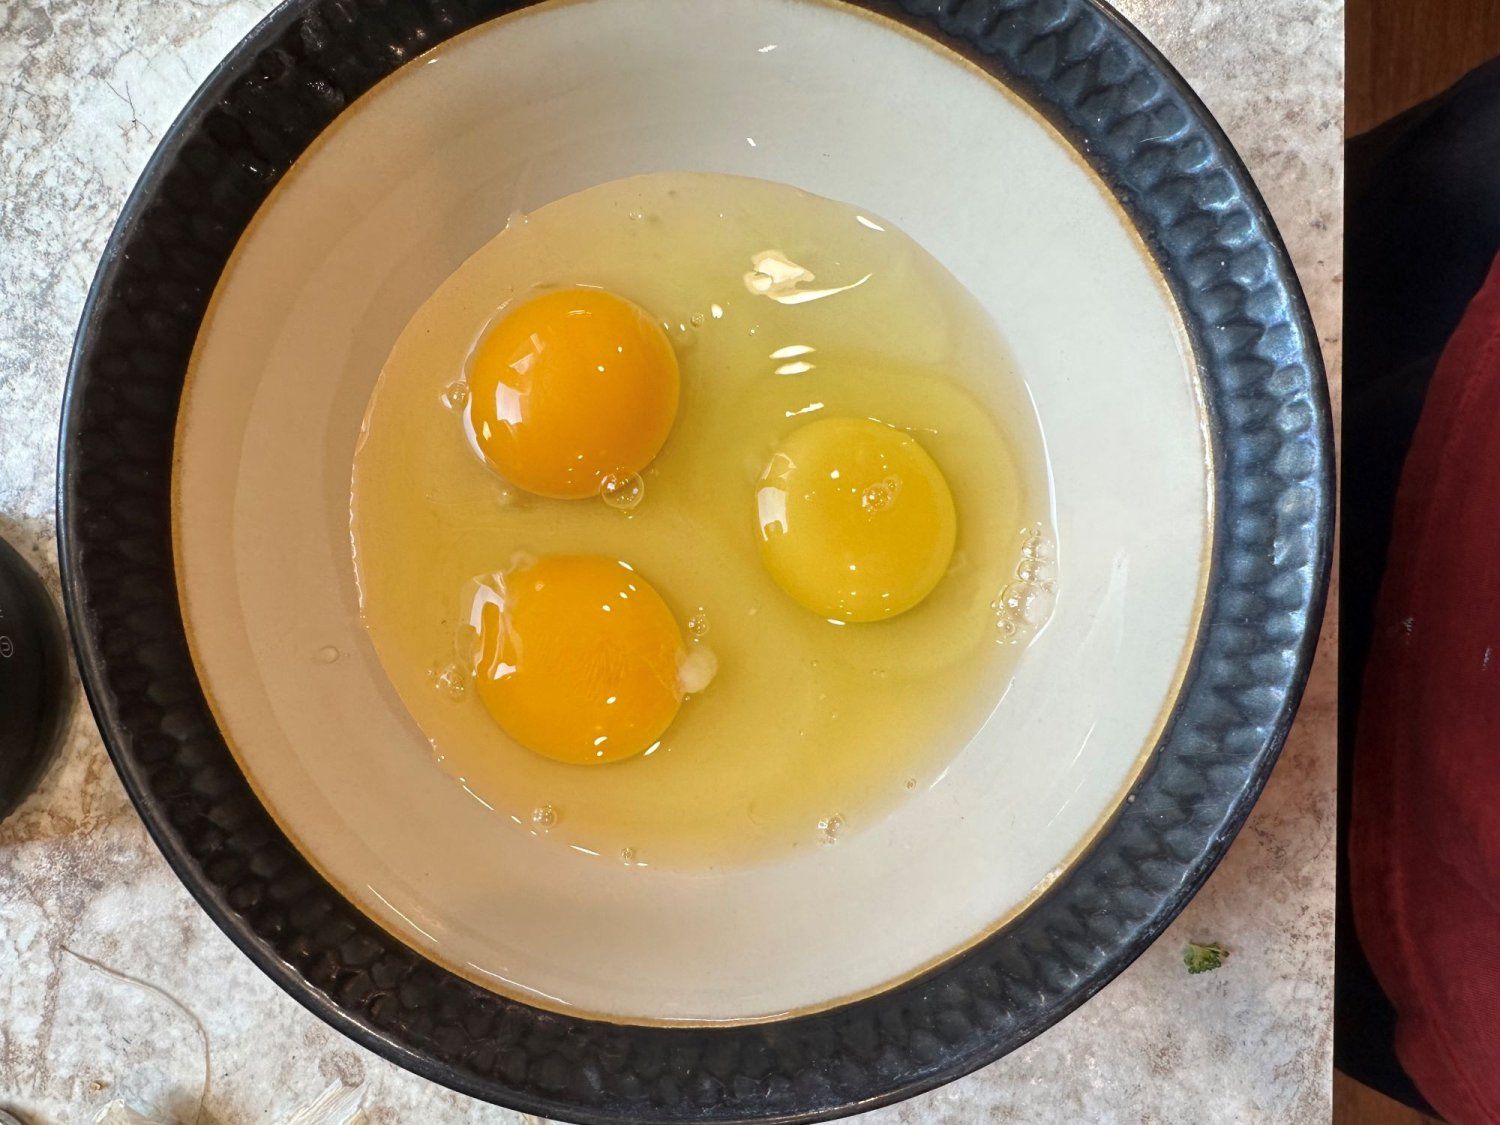 What’s With the Egg Yolk Colors?